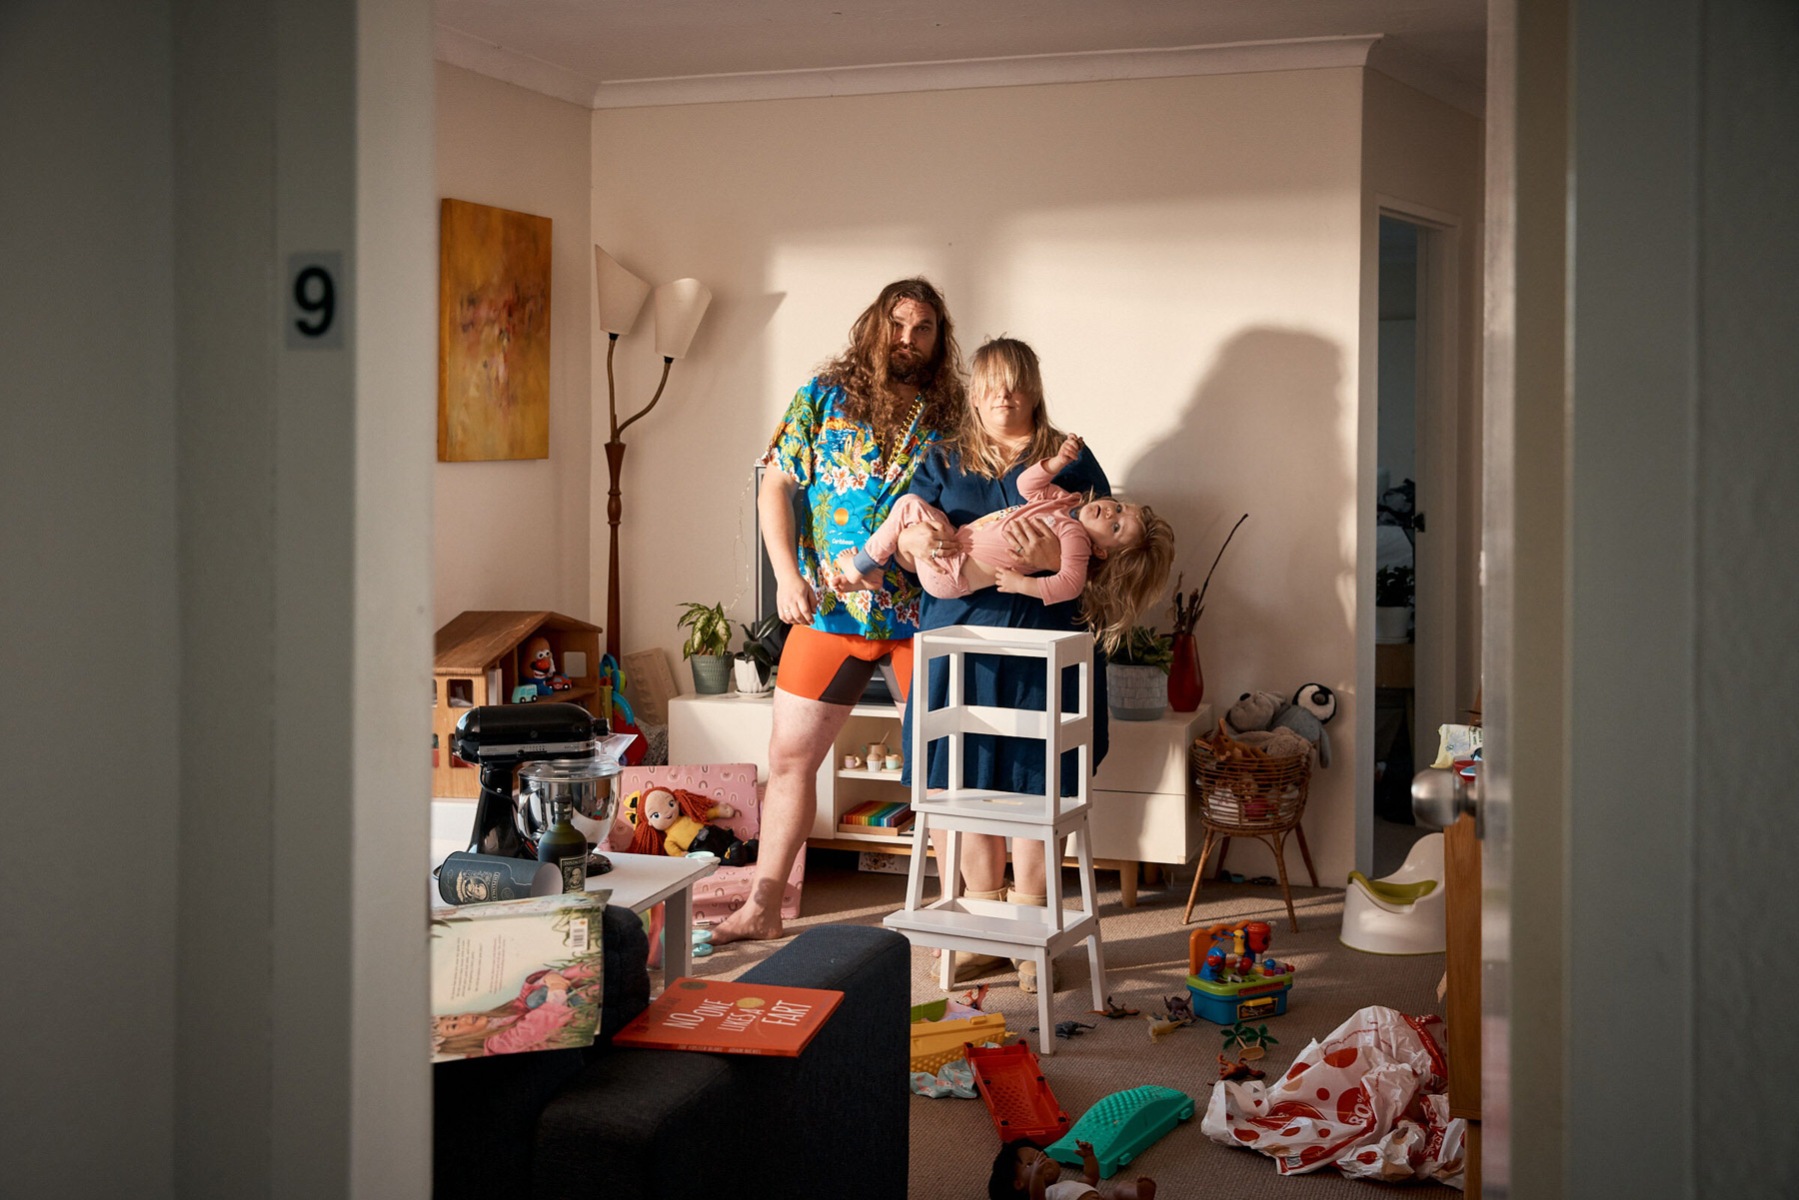 A photograph of two disheveled adults and a child in a room scattered with toys, furniture, books and cookware